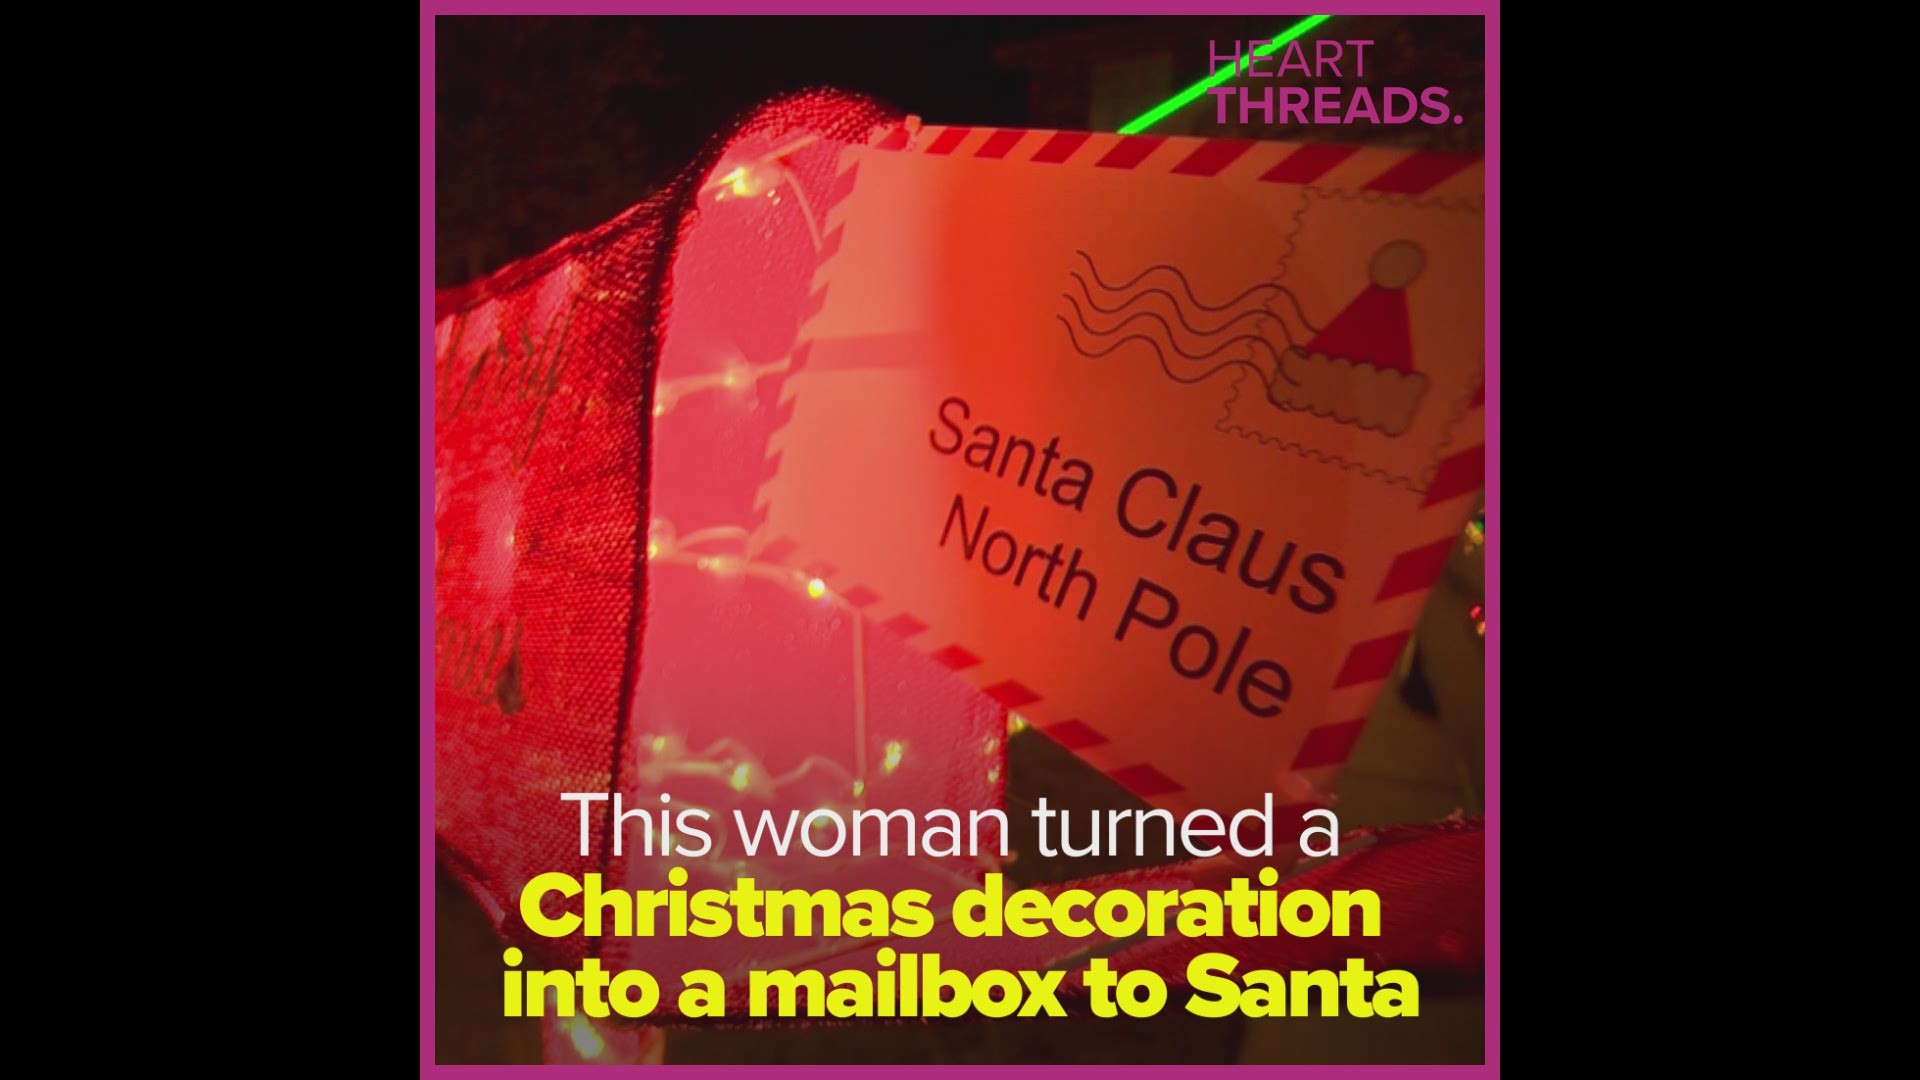 When Ariel put out a decorative 'letters to Santa' mailbox, she never expected to find a letter inside.